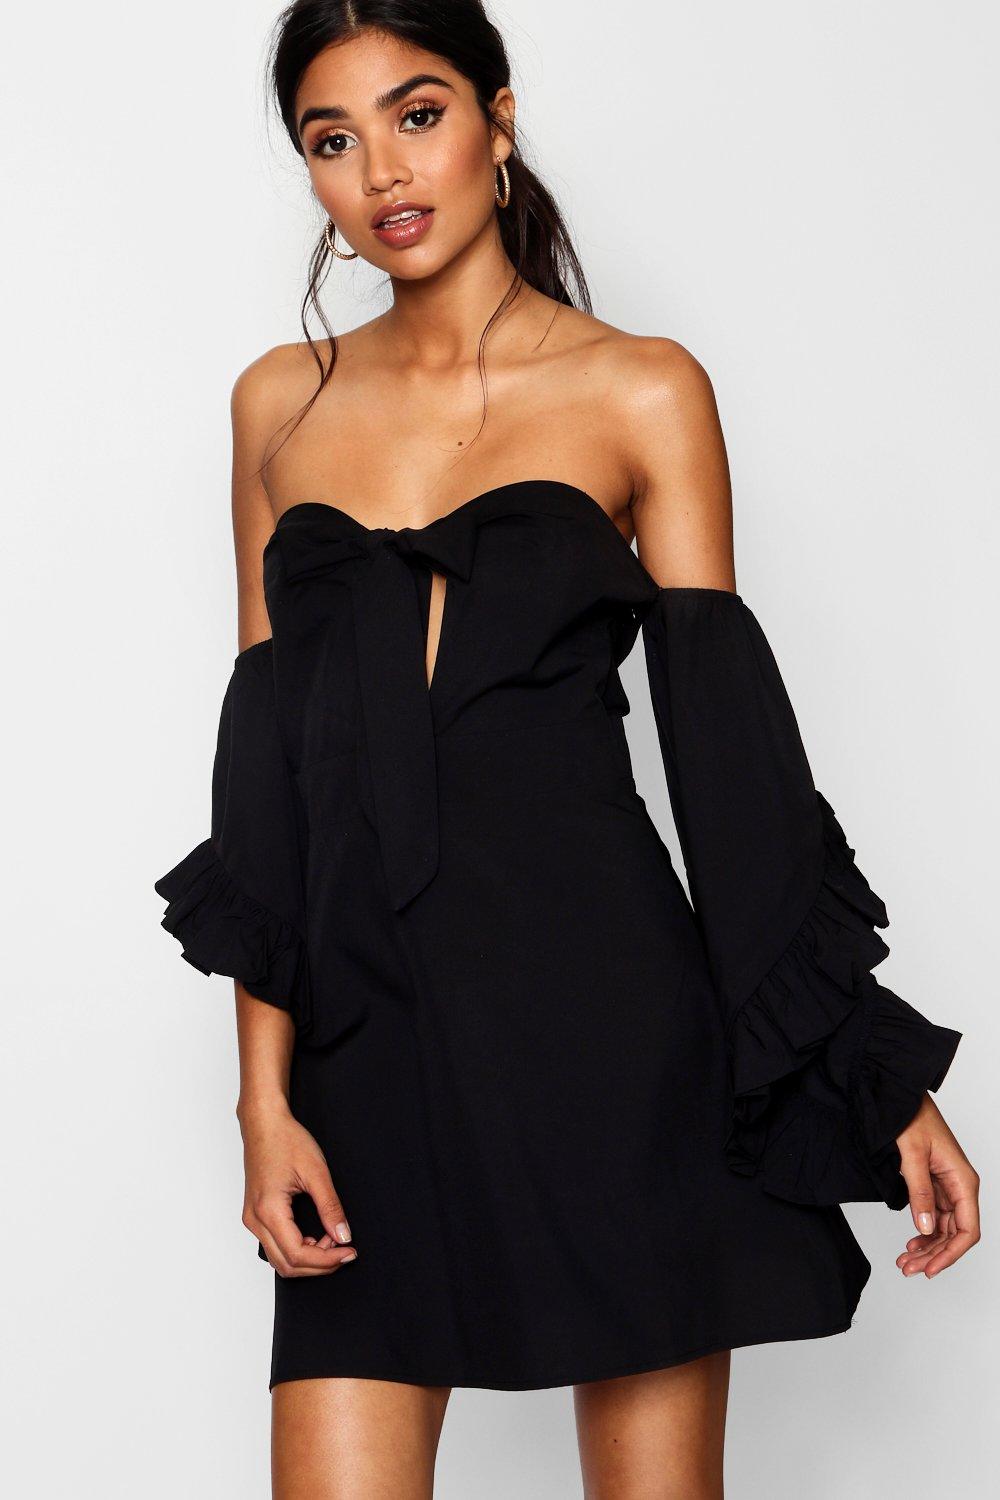 black dress with knot front